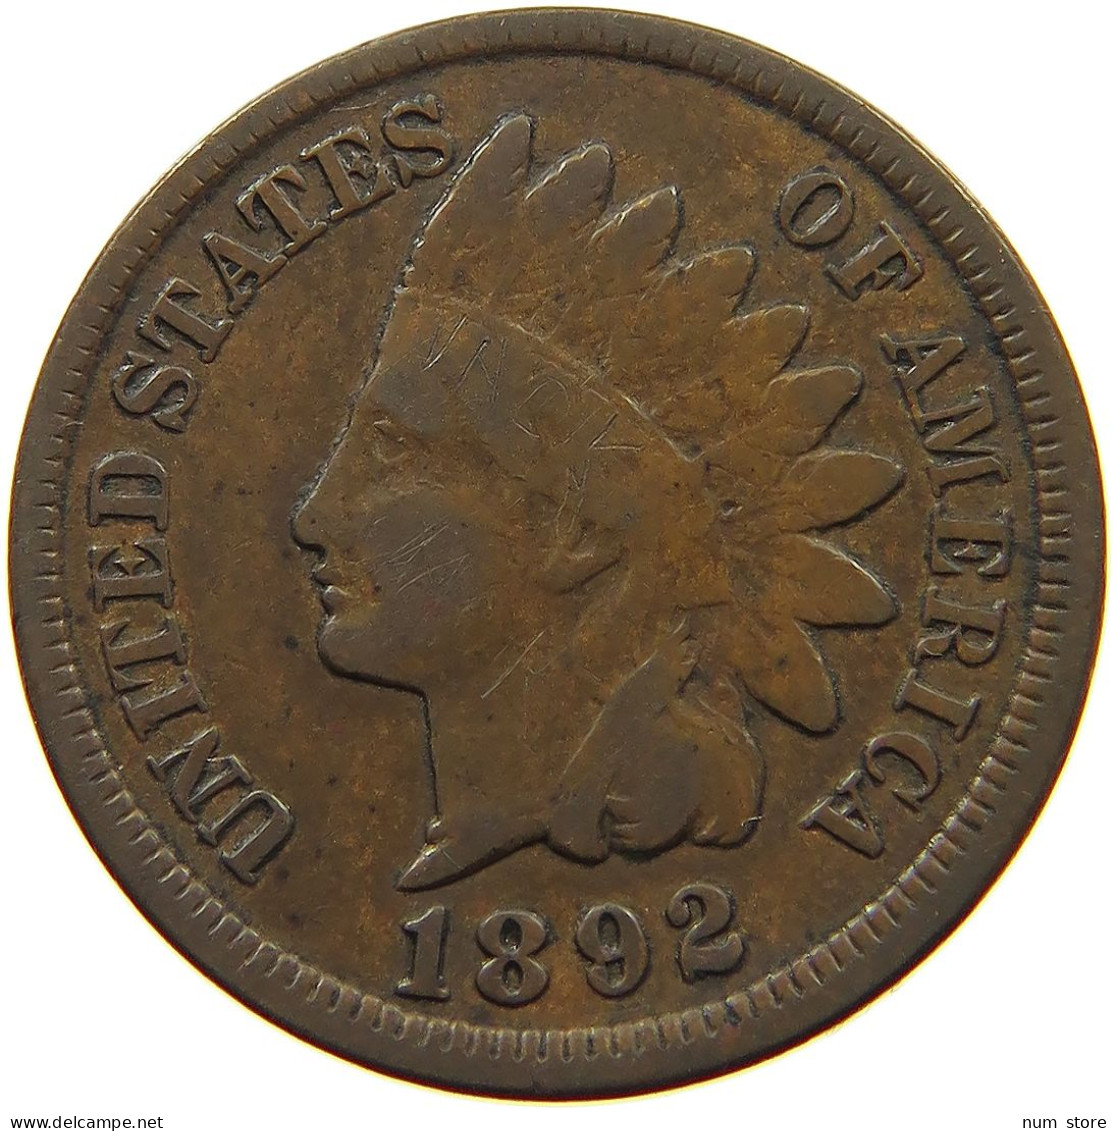 UNITED STATES OF AMERICA CENT 1892 INDIAN HEAD #s063 0121 - 1859-1909: Indian Head